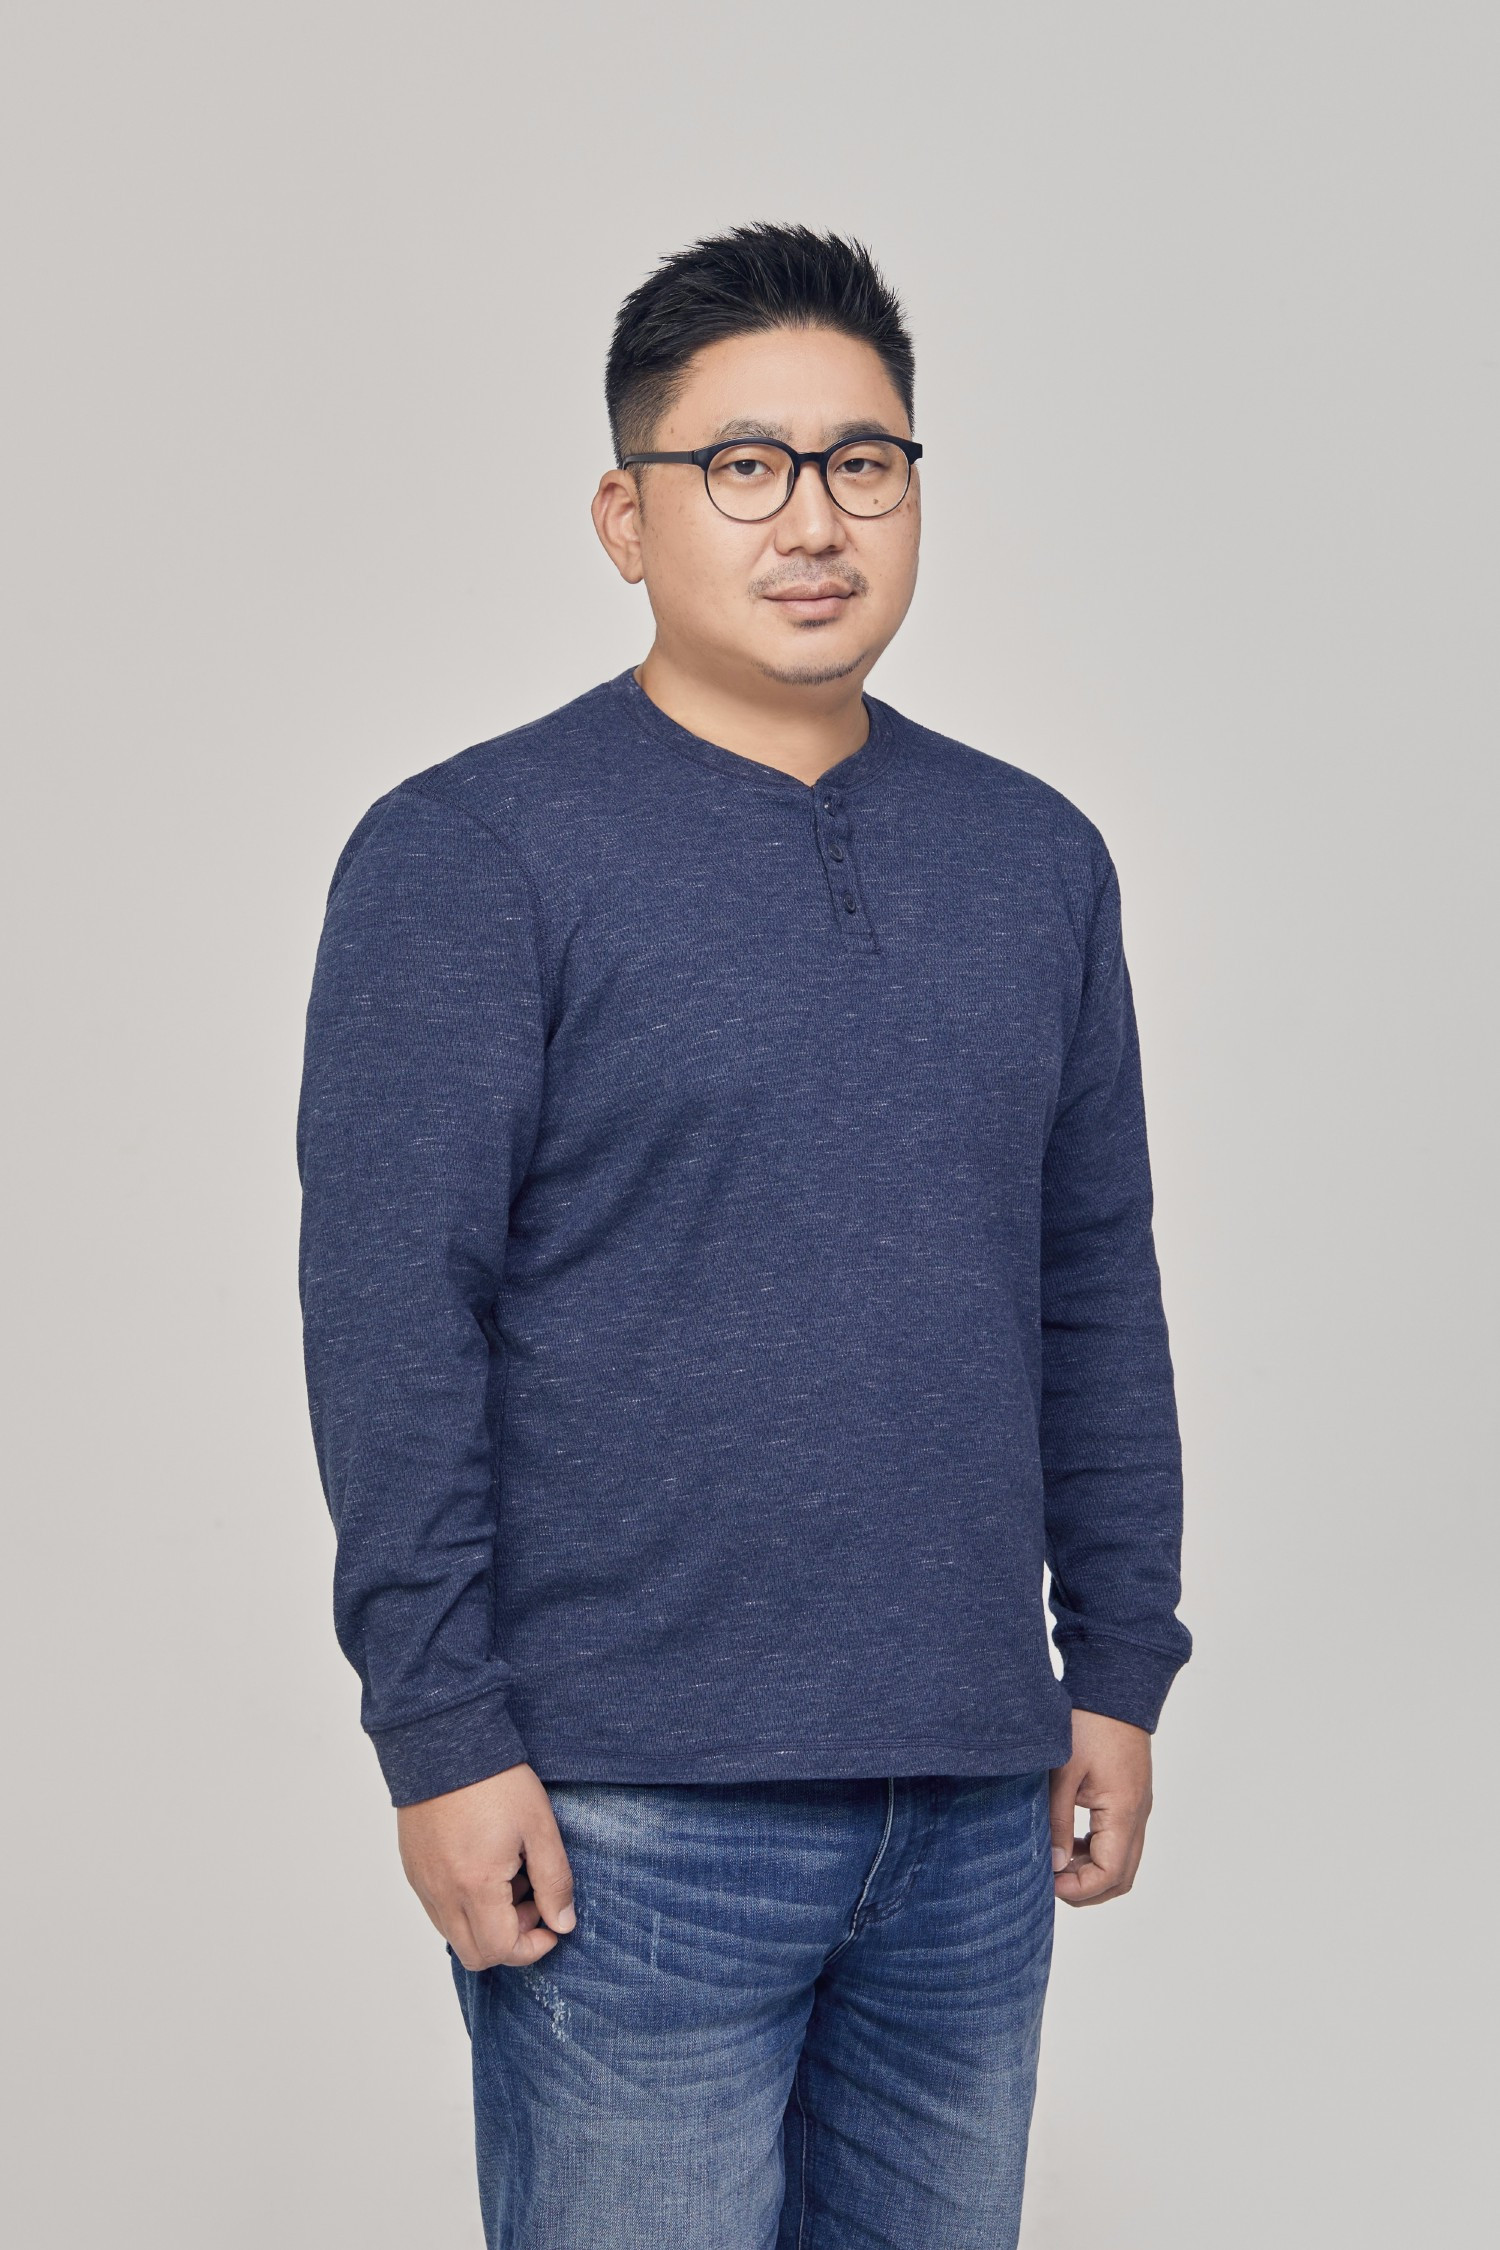 Sunguk Moon is the co-founder and CEO of Blind. Moon started Blind to bring transparency to the workplace.